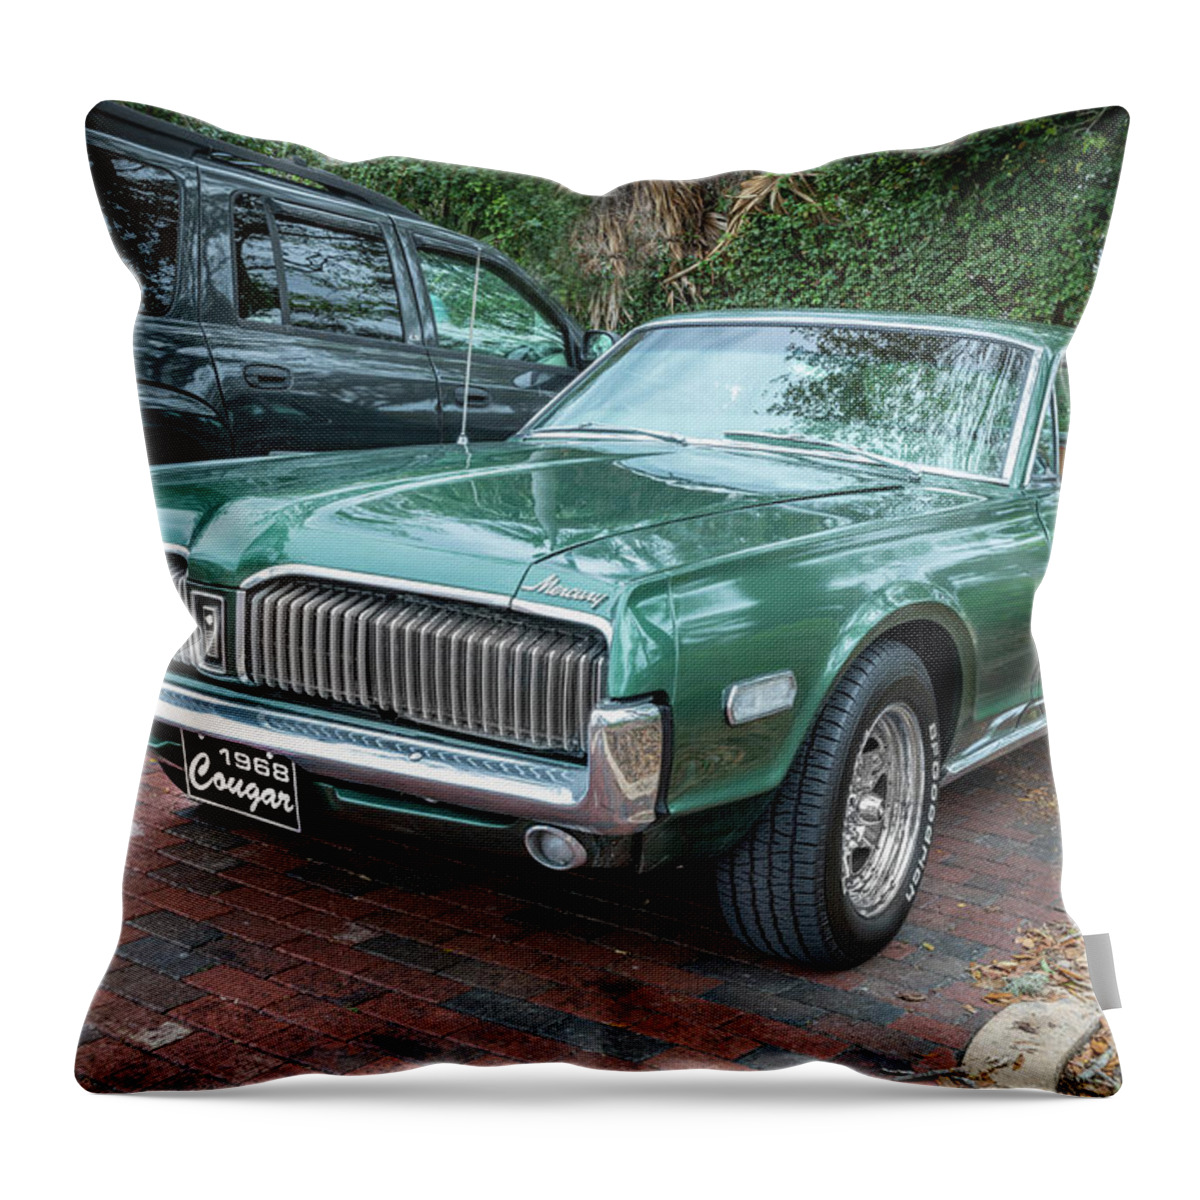 1968 Green Mercury Cougar Throw Pillow featuring the photograph 1968 Mercury Cougar X107 by Rich Franco